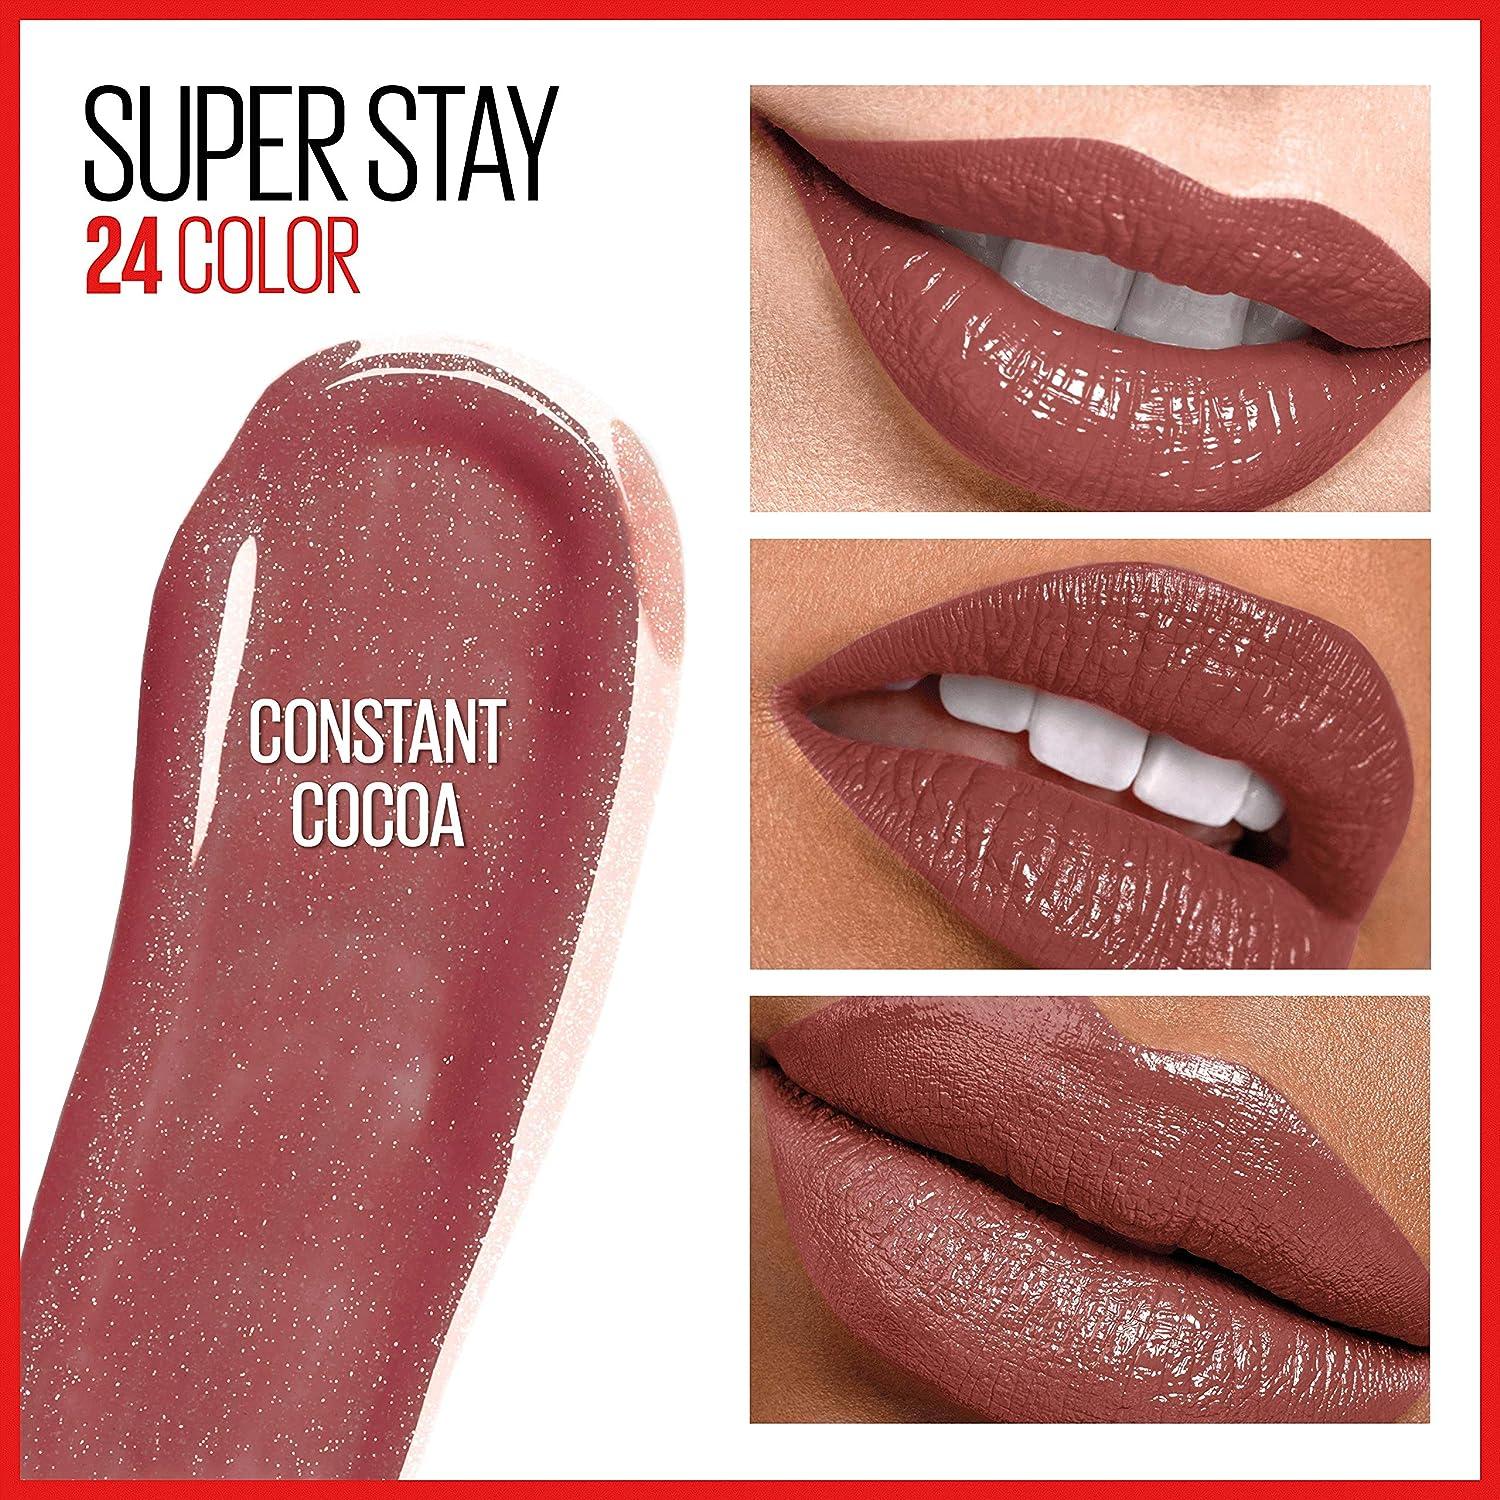 Maybelline New York Super Stay 24Hr Makeup, Cocoa, 1 Fluid Ounce